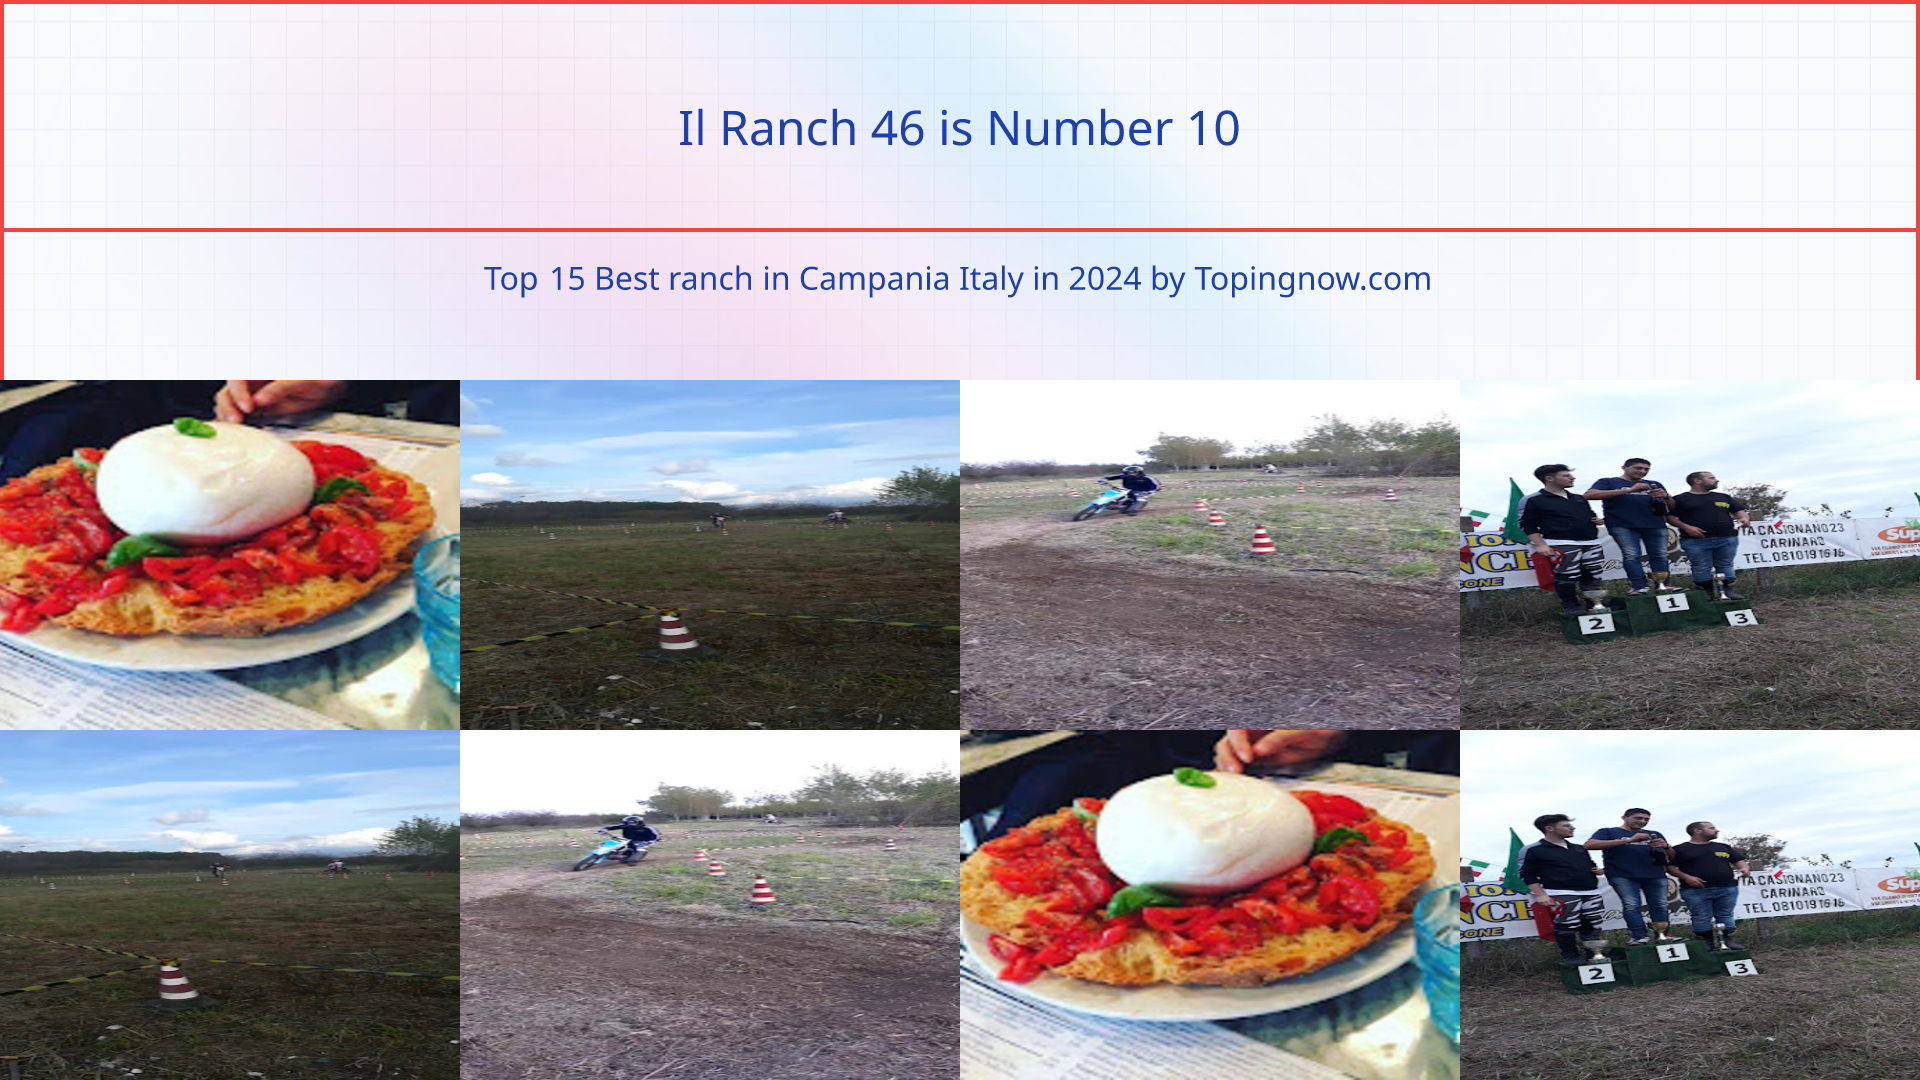 Il Ranch 46: Top 15 Best ranch in Campania Italy in 2024